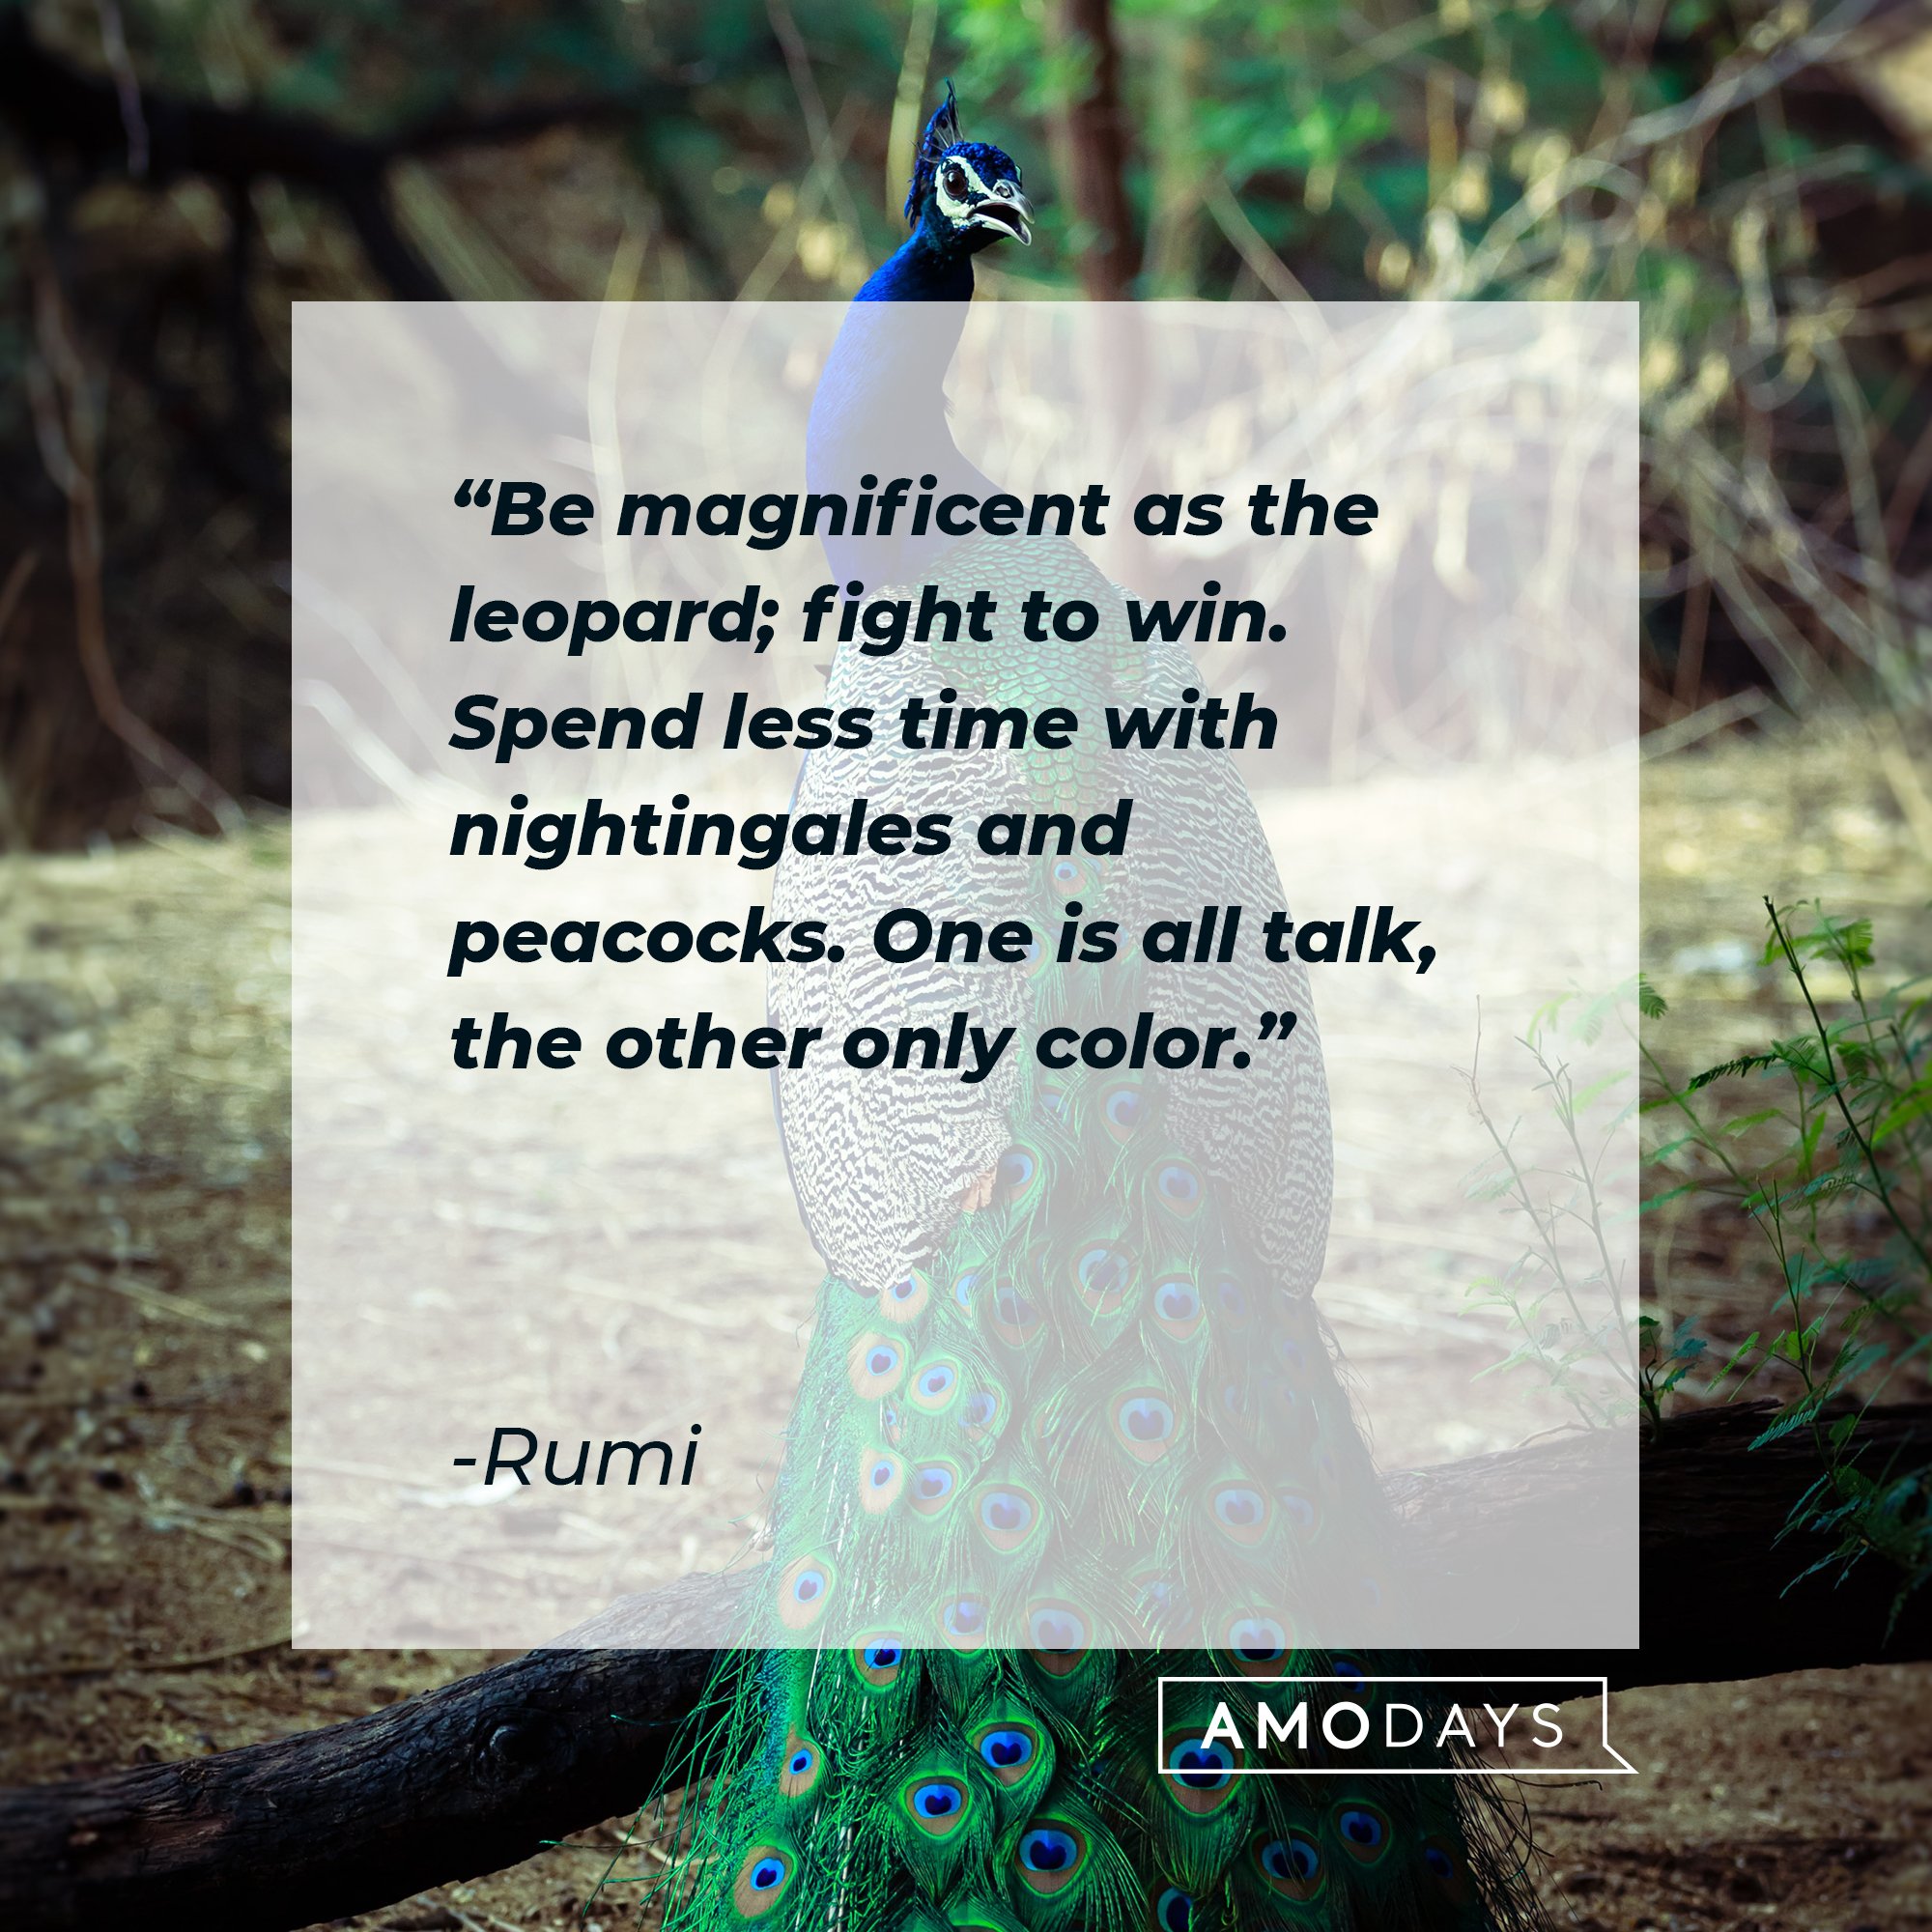  Rumi’s quote: "Be magnificent as the leopard; fight to win. Spend less time with nightingales and peacocks. One is all talk, the other only color." | Image: AmoDays